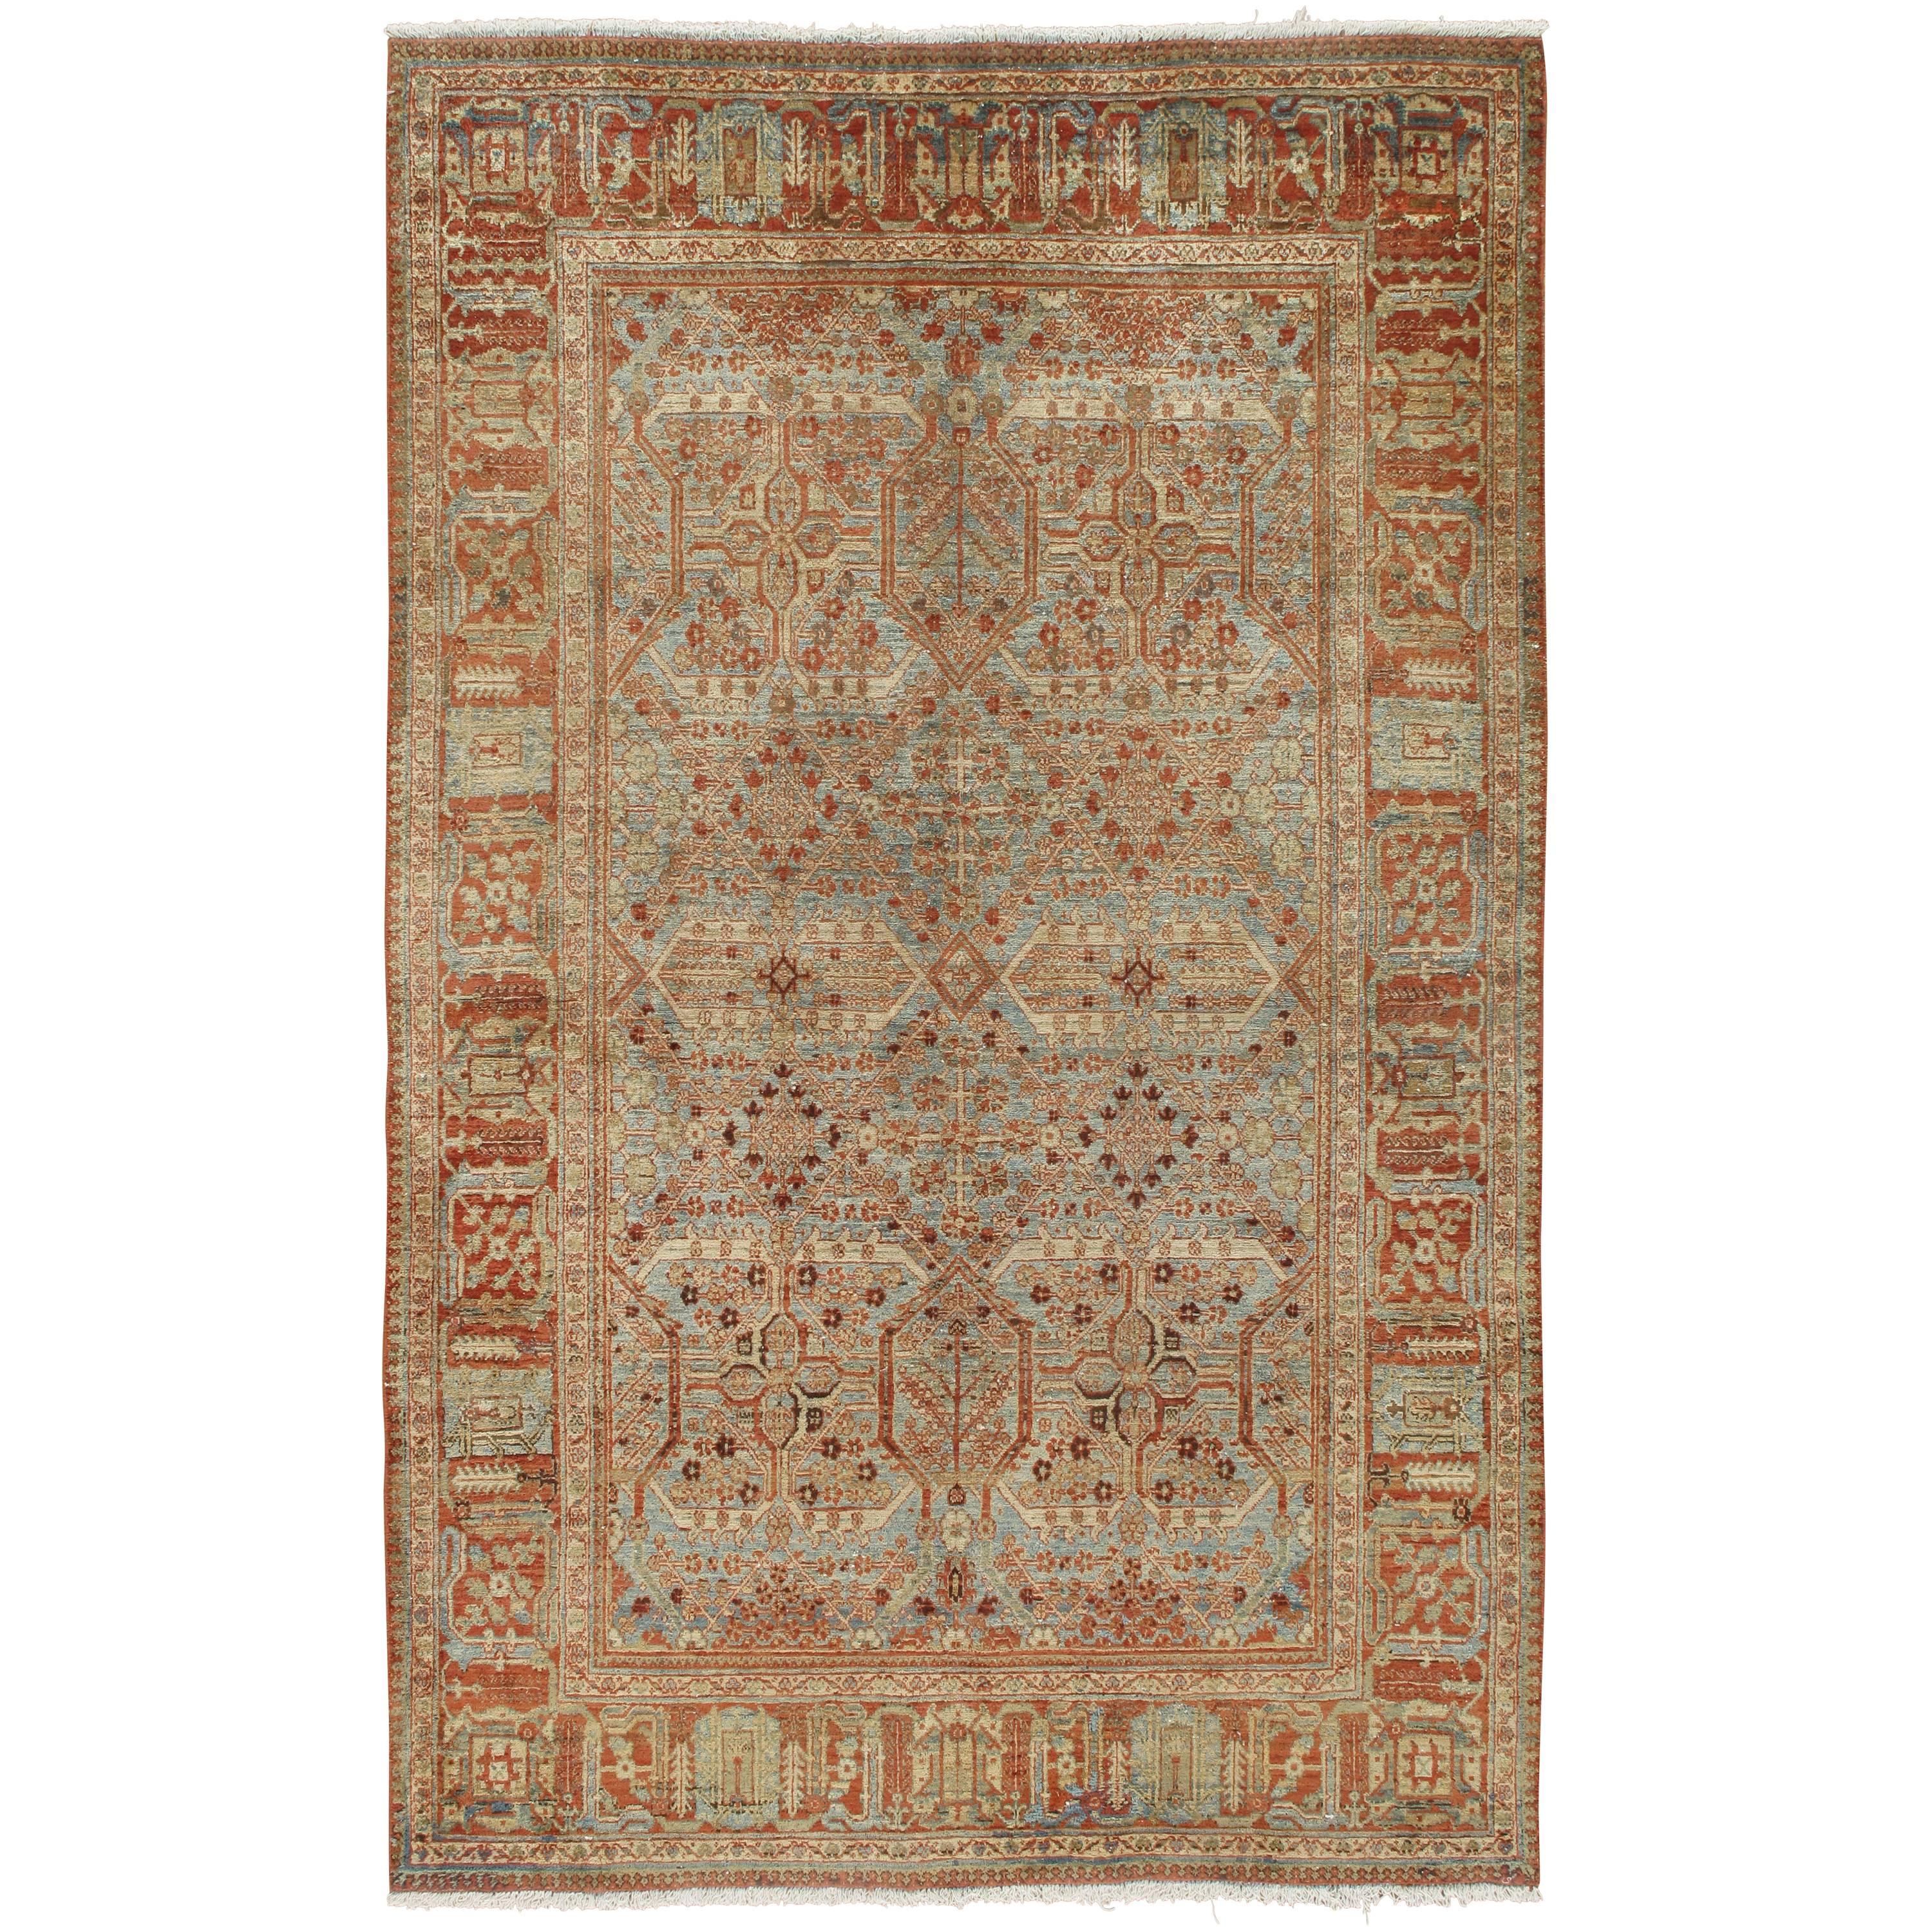 Antique Tabriz Rug, Handmade Oriental Rug in Terracotta, Light Blue and Taupe